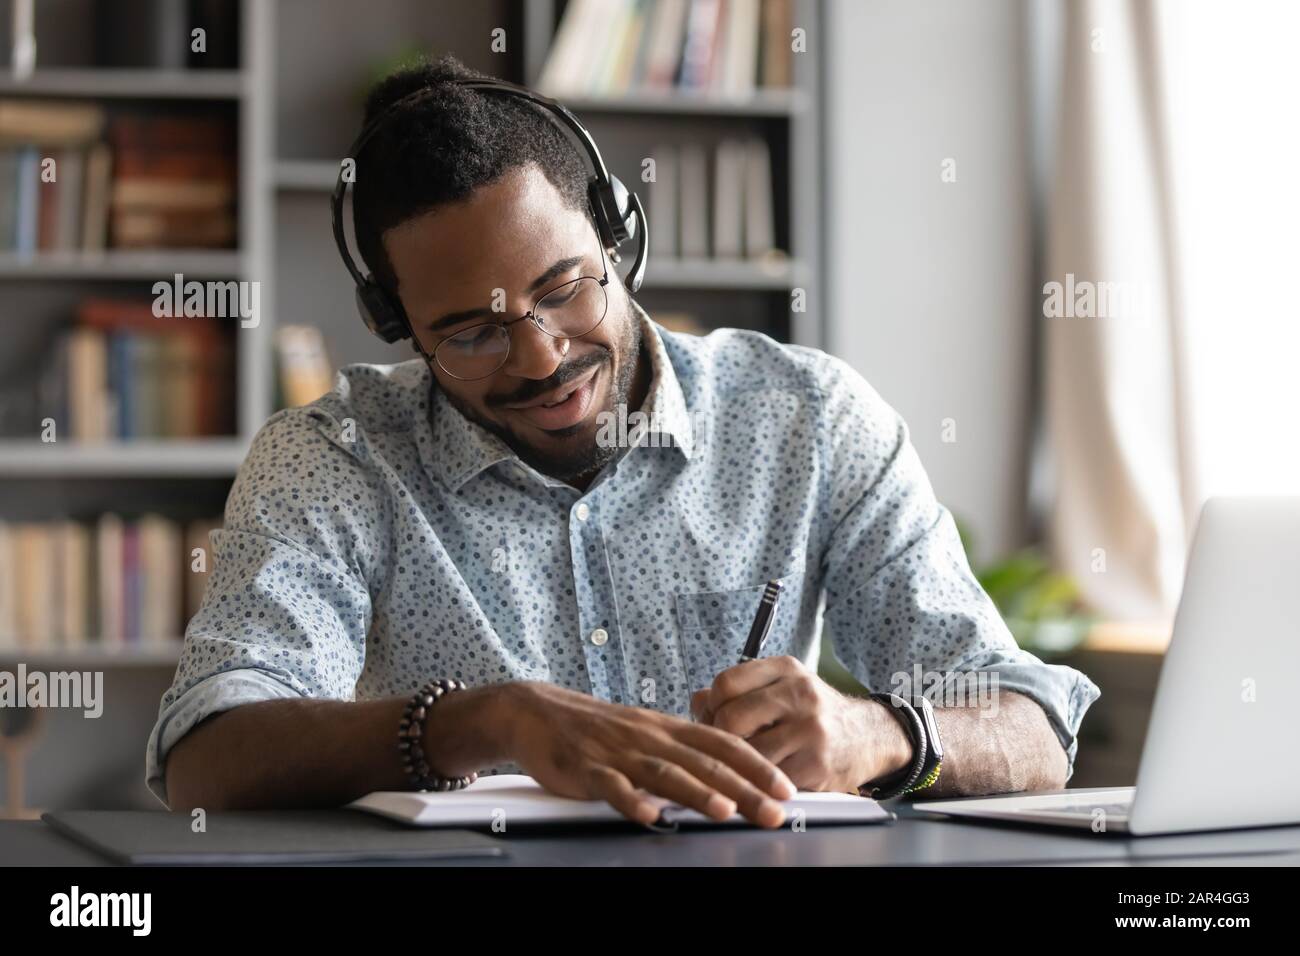 Smiling african male student professional wear headset elearning making notes Stock Photo